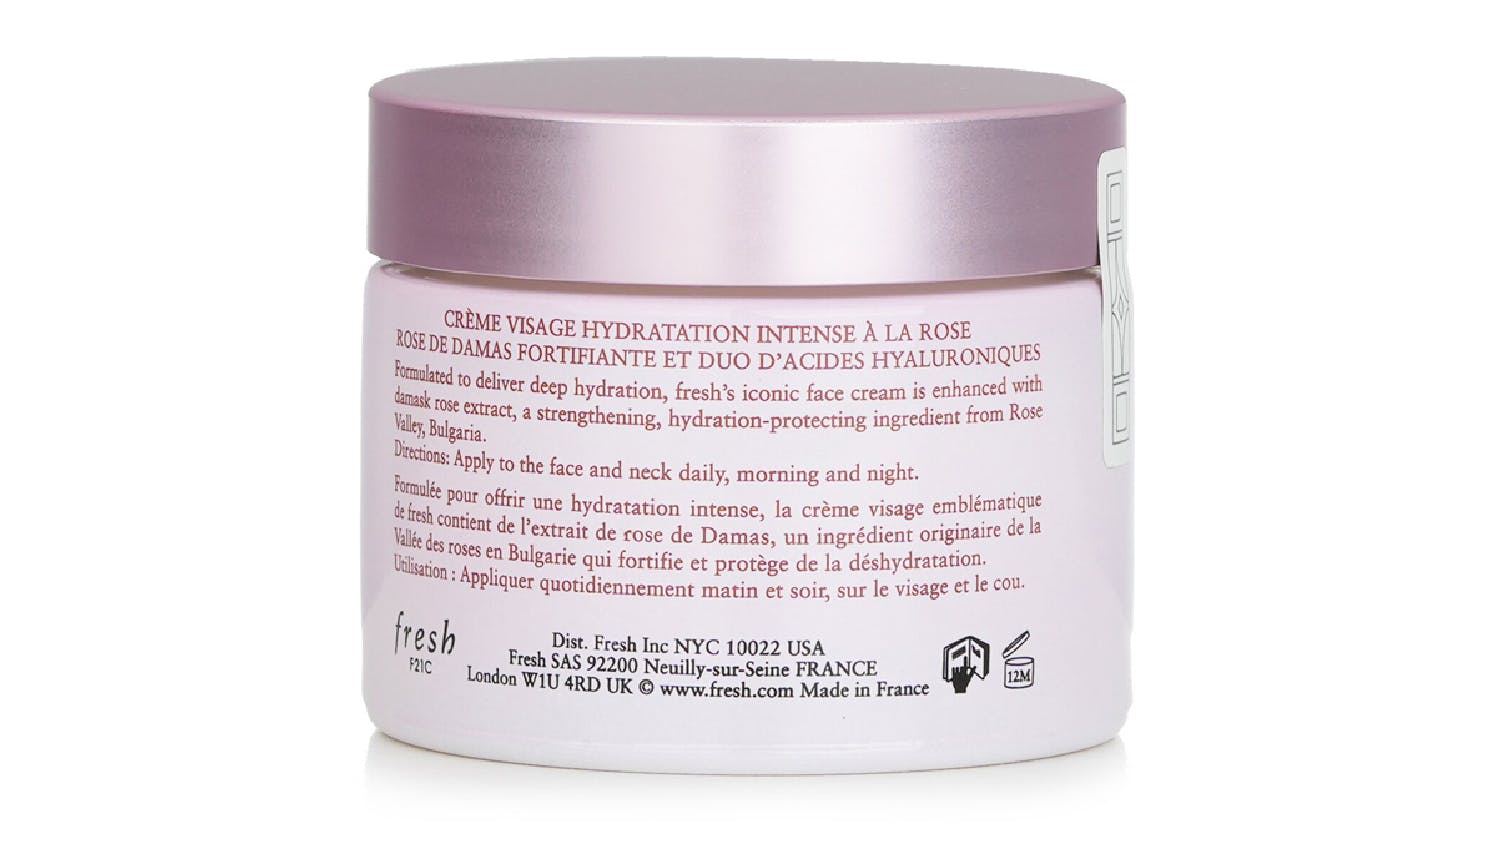 Fresh Rose Deep Hydration Face Cream - Normal to Dry Skin Types - 50ml/1.6oz